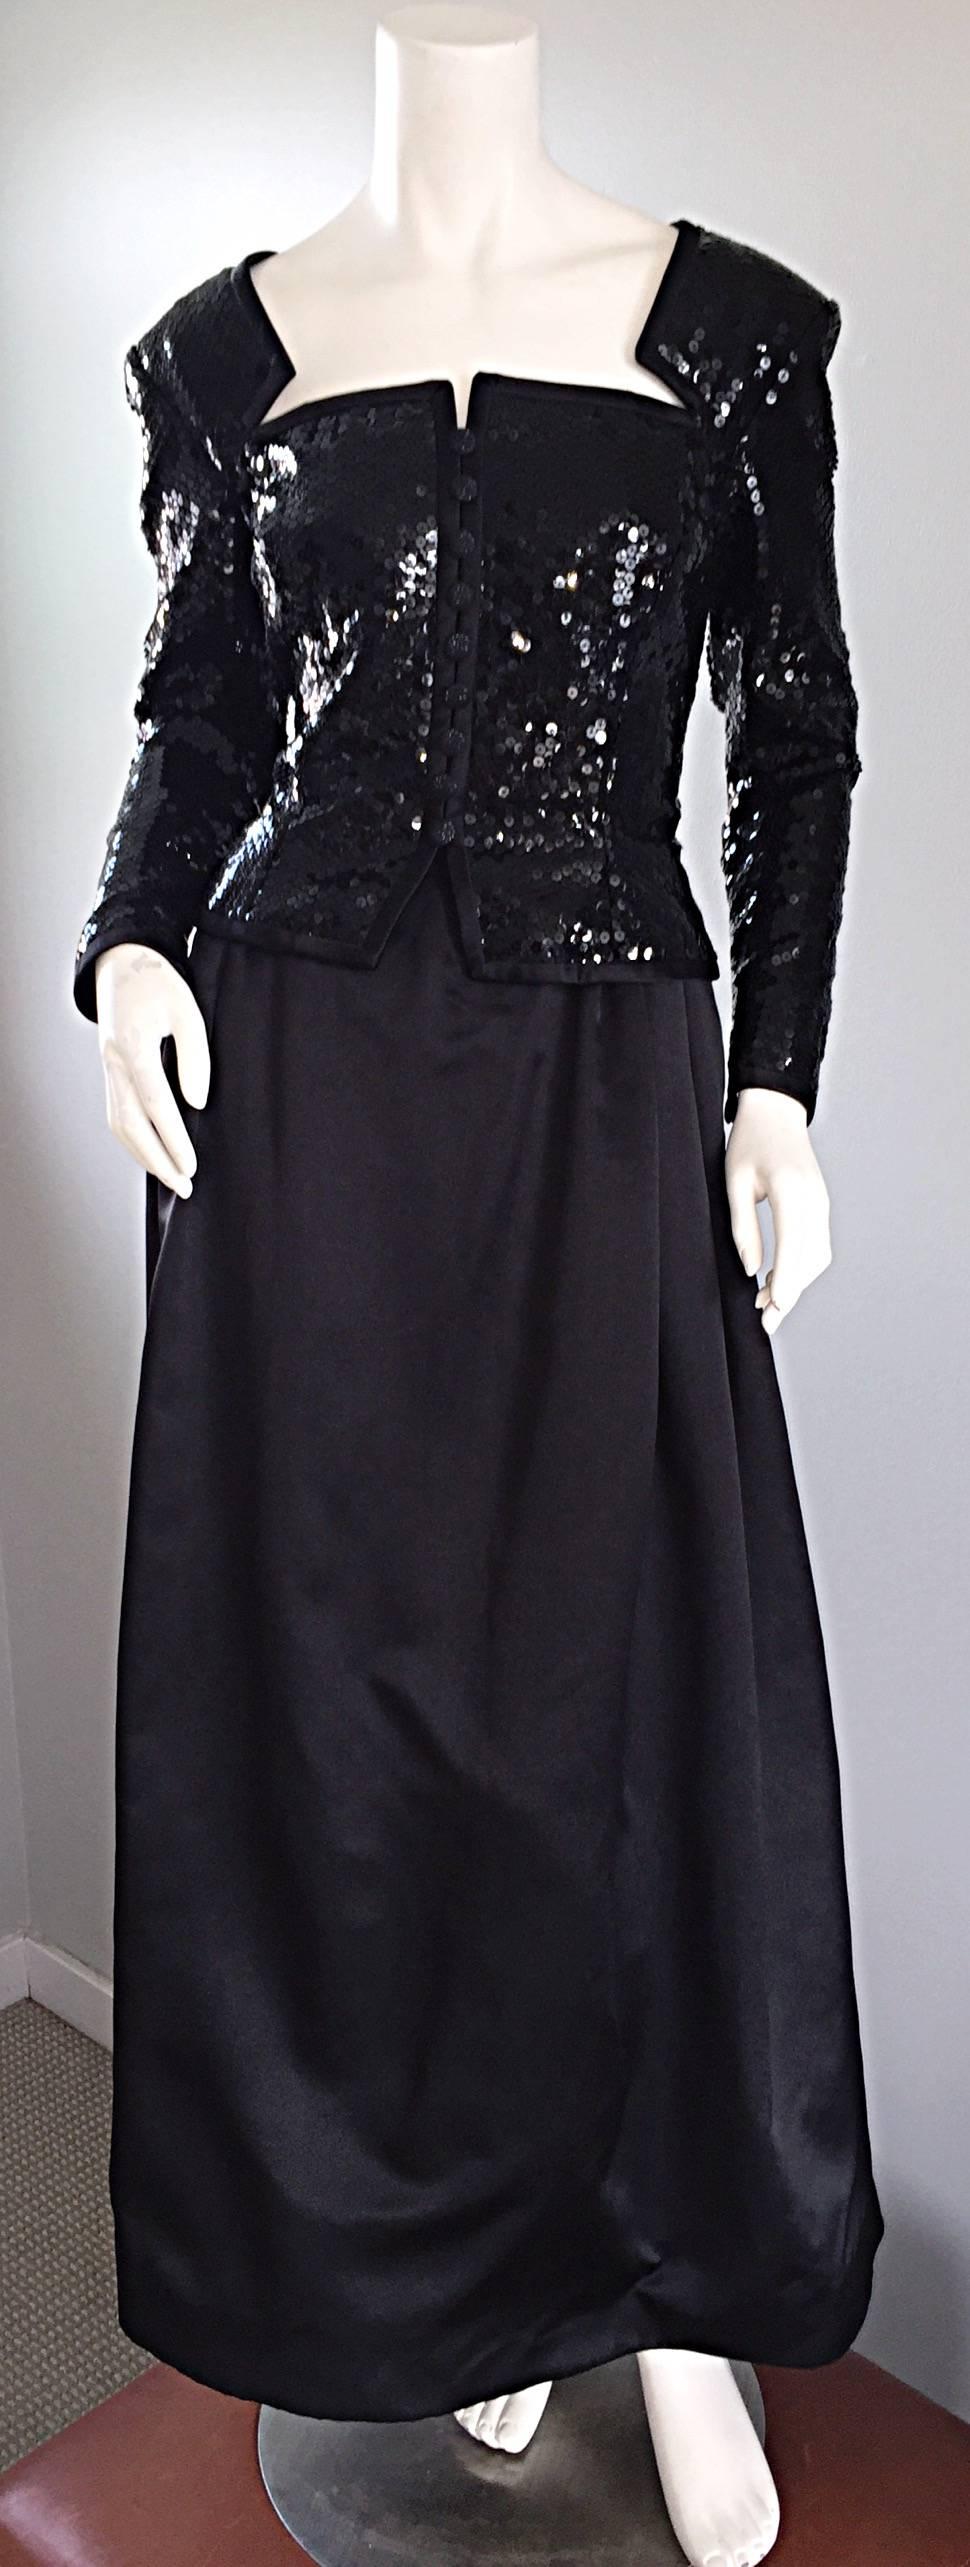 Gorgeous vintage TRAVILLA black gown! Features an all-over sequined bodice, with avant Garde cut-outs, trimmed in black satin at the bust. Looks like a strapless dress with gloves. Mock jeweled buttons up the bodice, with a nipped wasp waist. Full